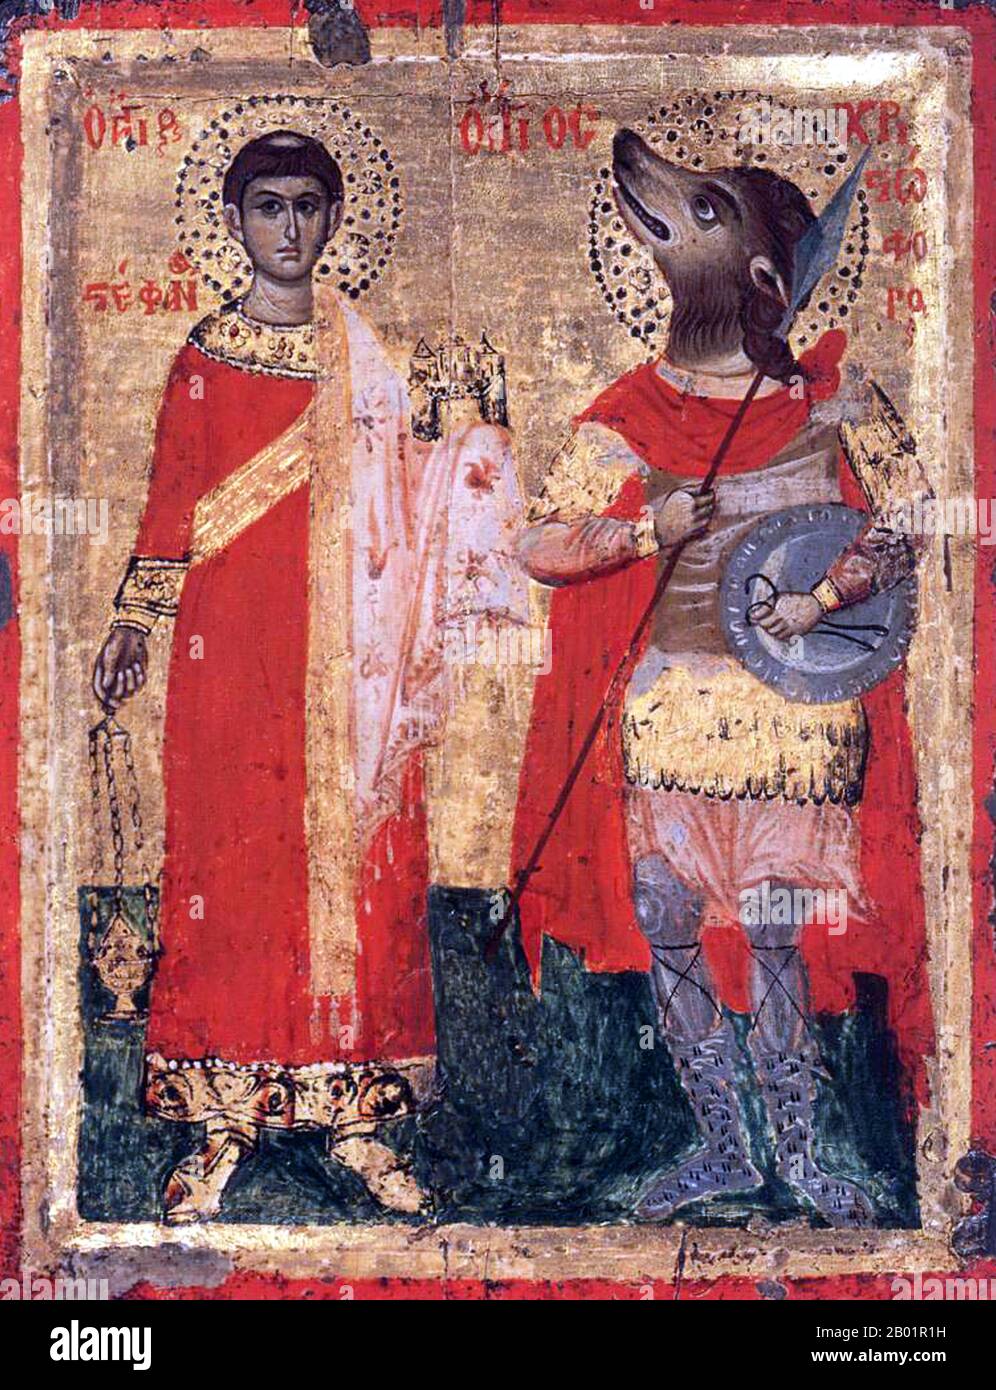 Greece/Byzantium: Traditional icon of St Stephen and St Christopher, the latter represented with a dog's head. Egg tempera on oak panel, c. 1700.  In Eastern Orthodox icons, Saint Christopher is often represented with the head of a dog. Stock Photo